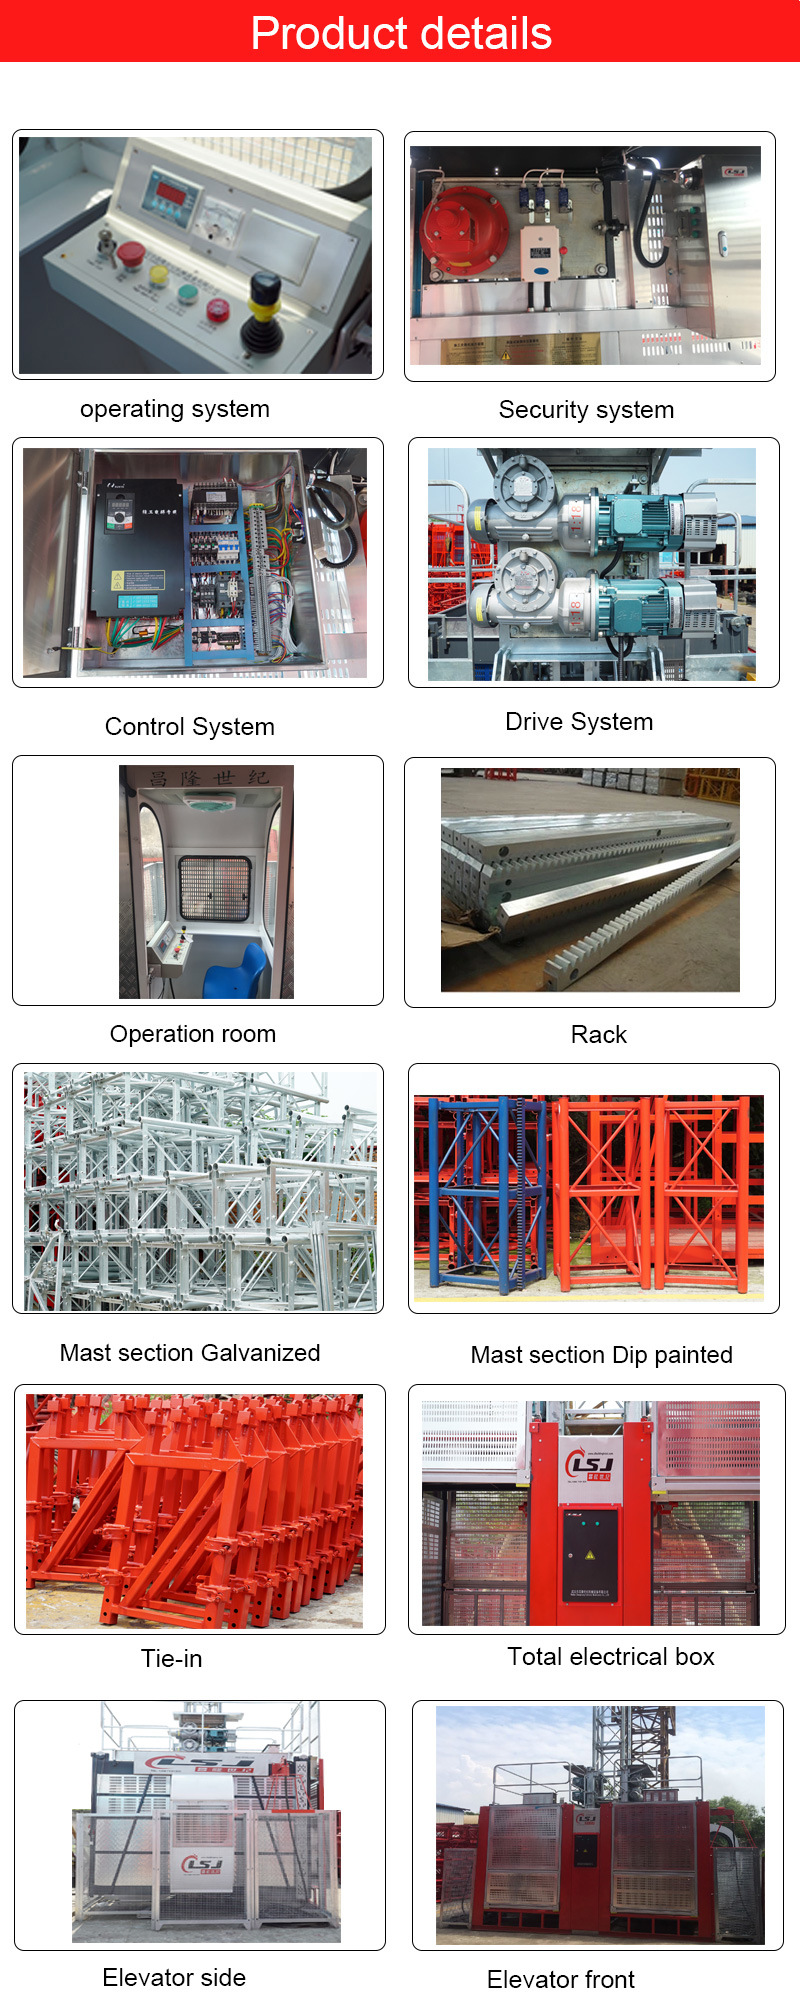 Sc200/200 or Sc100/100 or Sc200 or Sc100 Construction Elevator